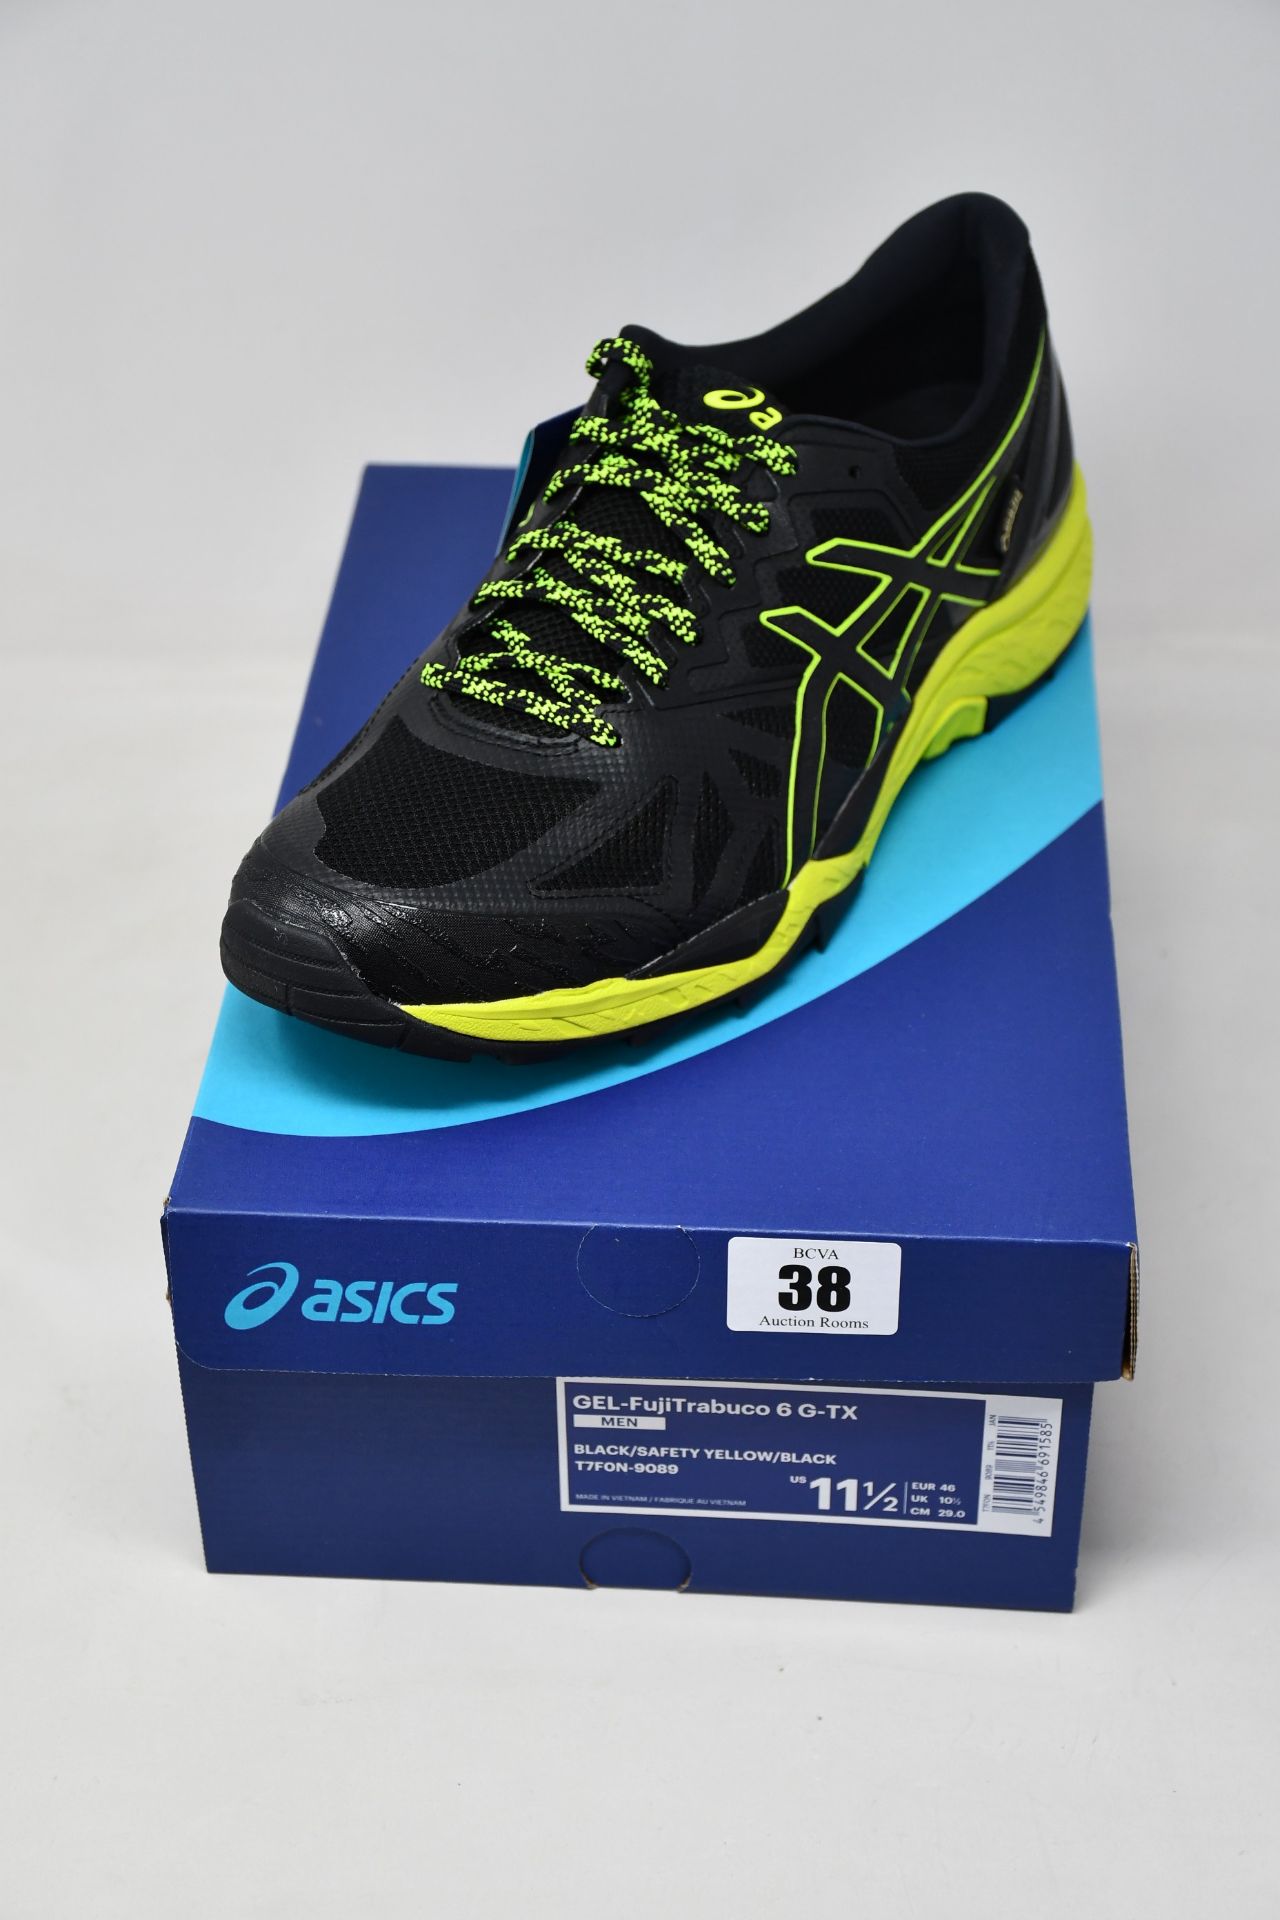 A pair of as new Asics Gel-FujiTrabuco 6 G-TX trainers (UK 10.5).